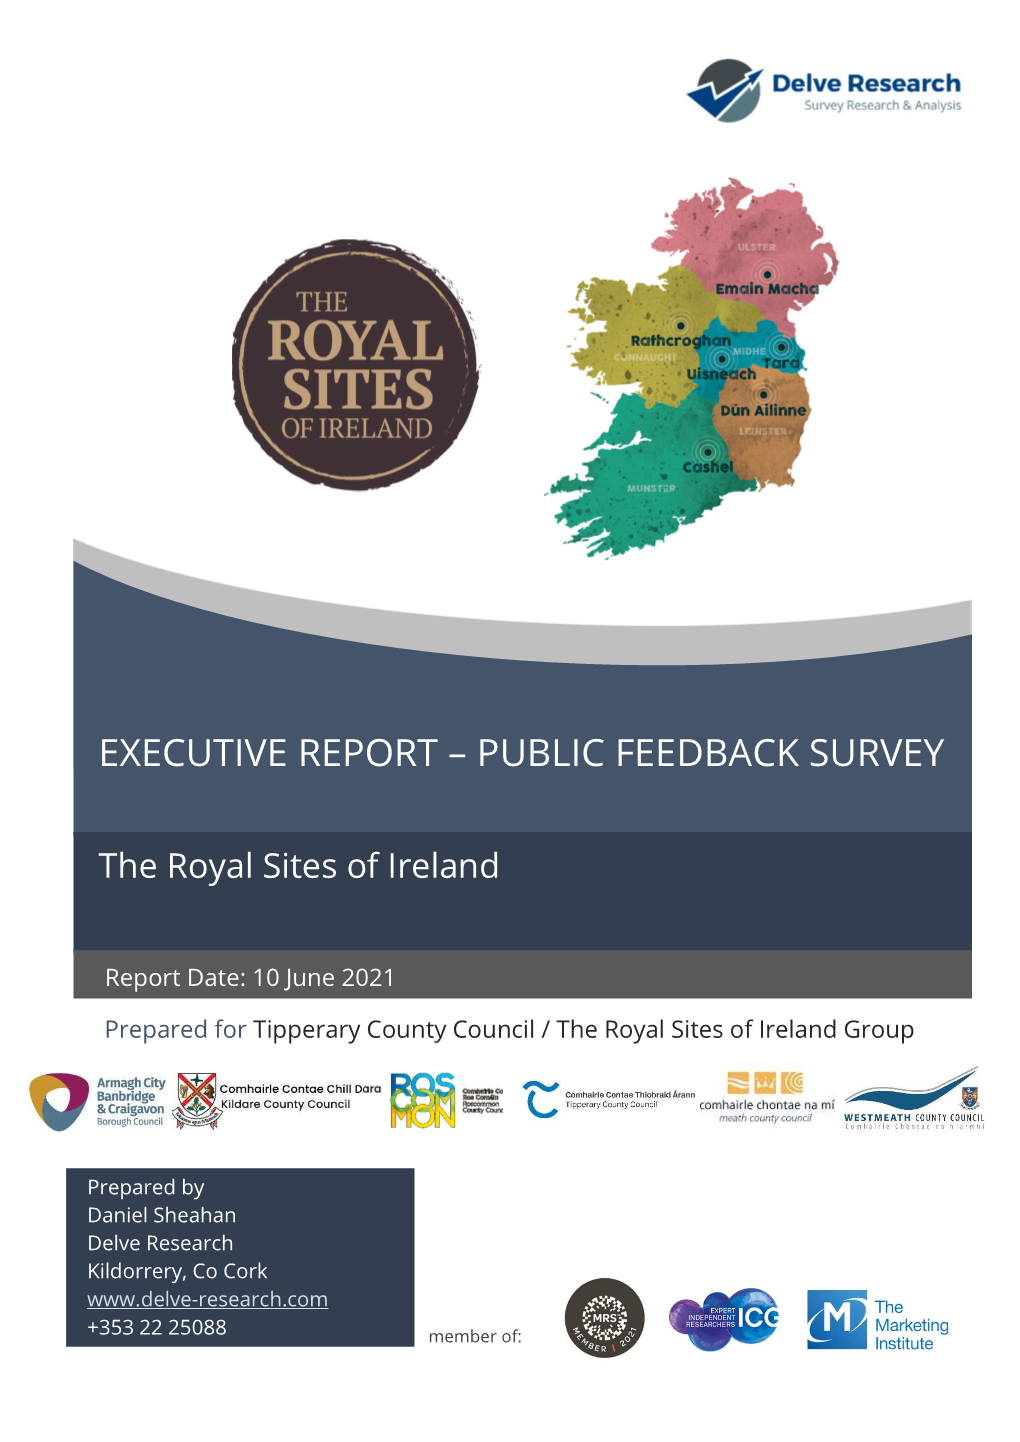 Executive Report on Public Feedback Survey by Delve Research